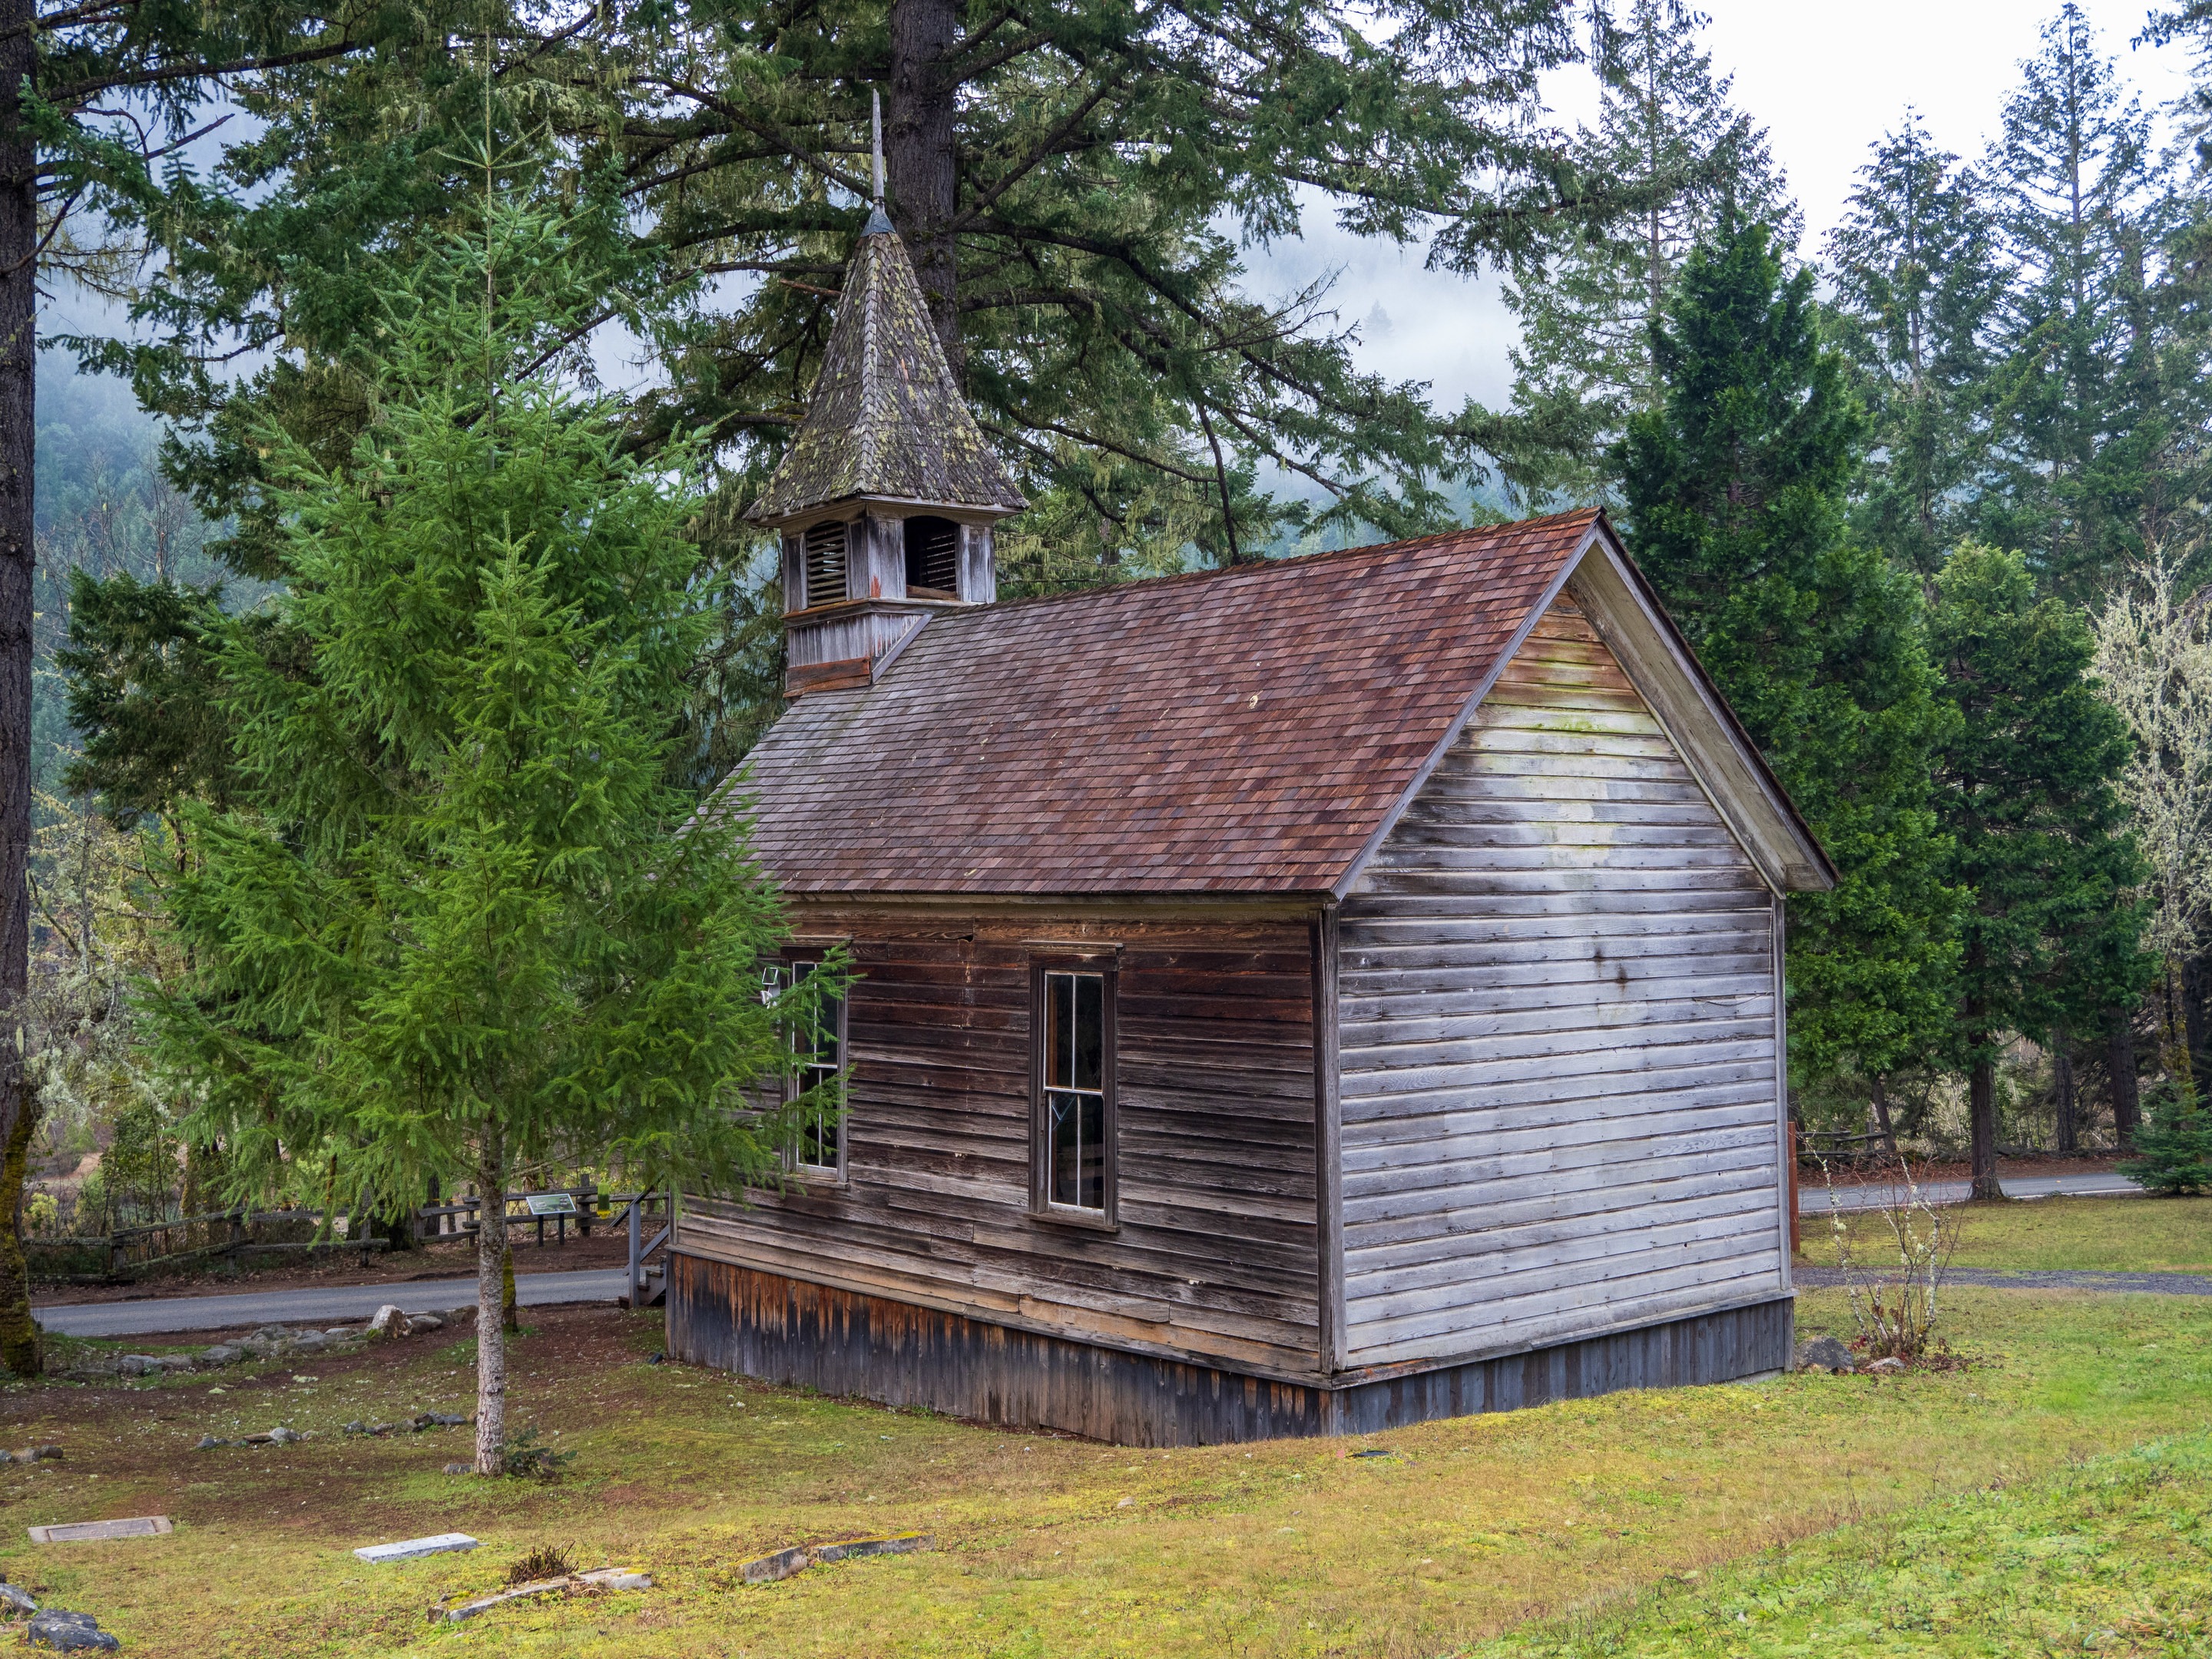 State of Oregon: Oregon Ghost Towns - Oregon Mining